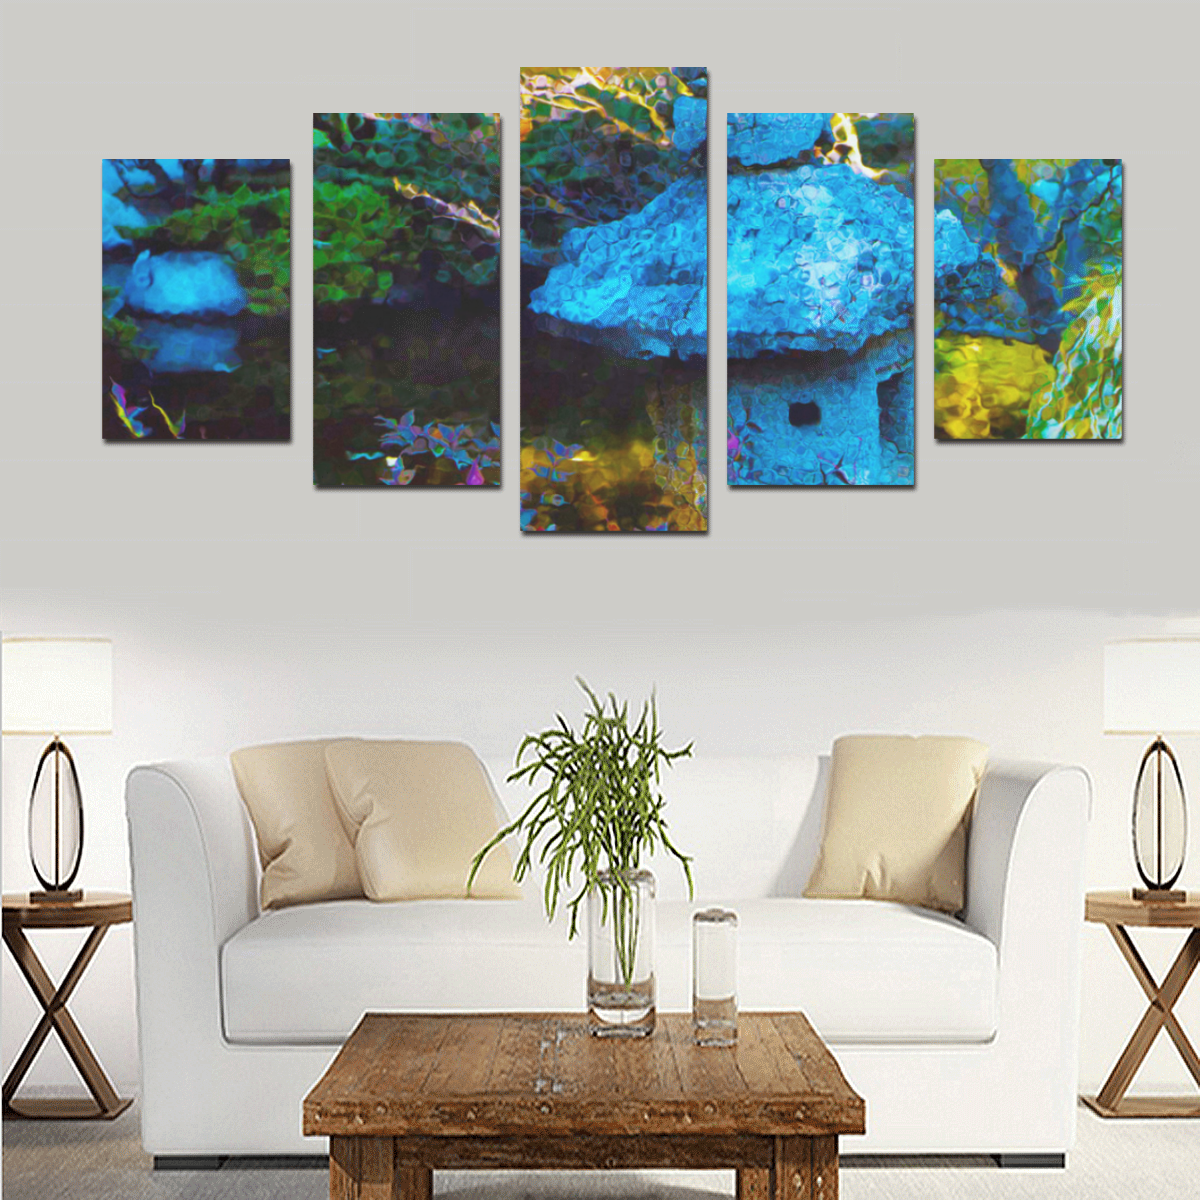 Japanese Painted Garden Canvas Print Sets D (No Frame)